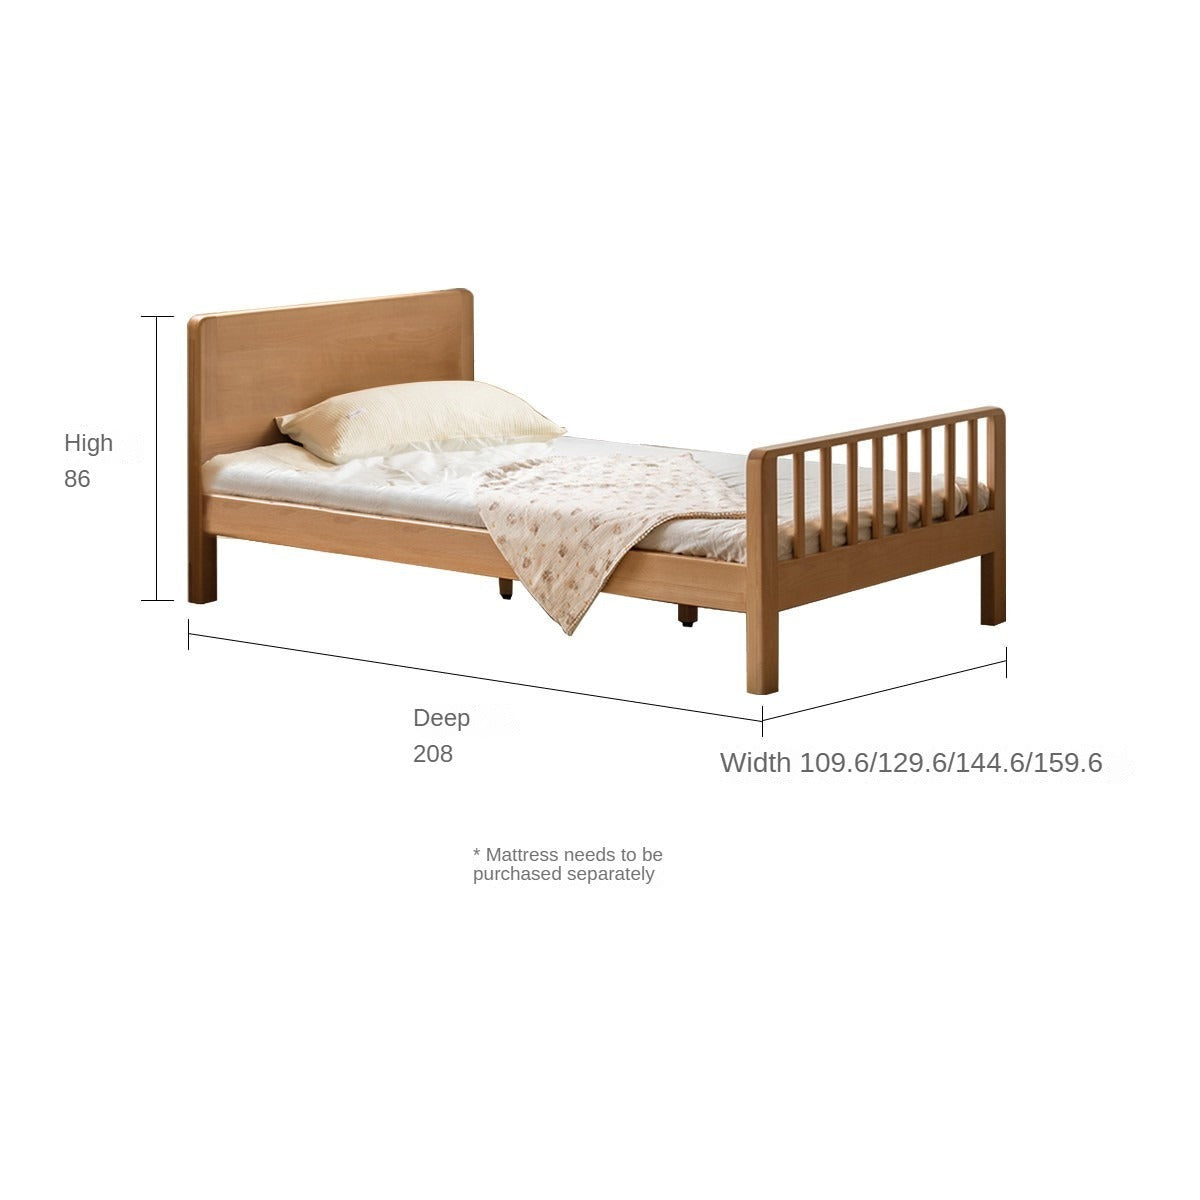 Beech Solid Wood Children's Bed for Boys and Girls Spliced Bed with Guardrail_.